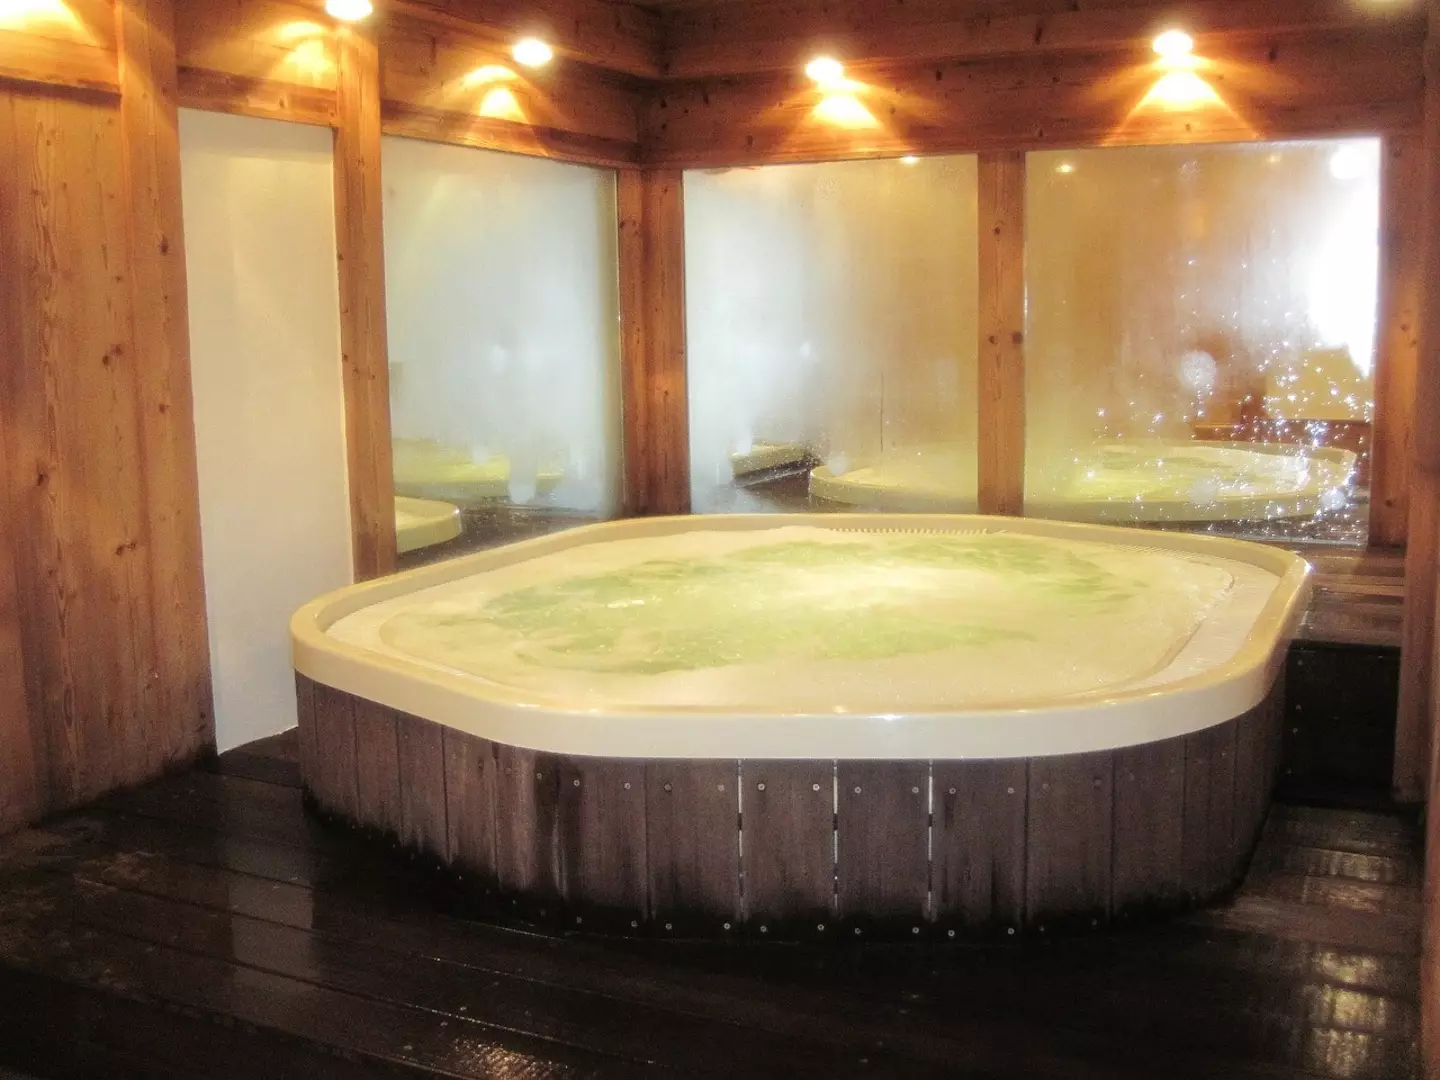 Jacuzzis are usually a relaxing experience.